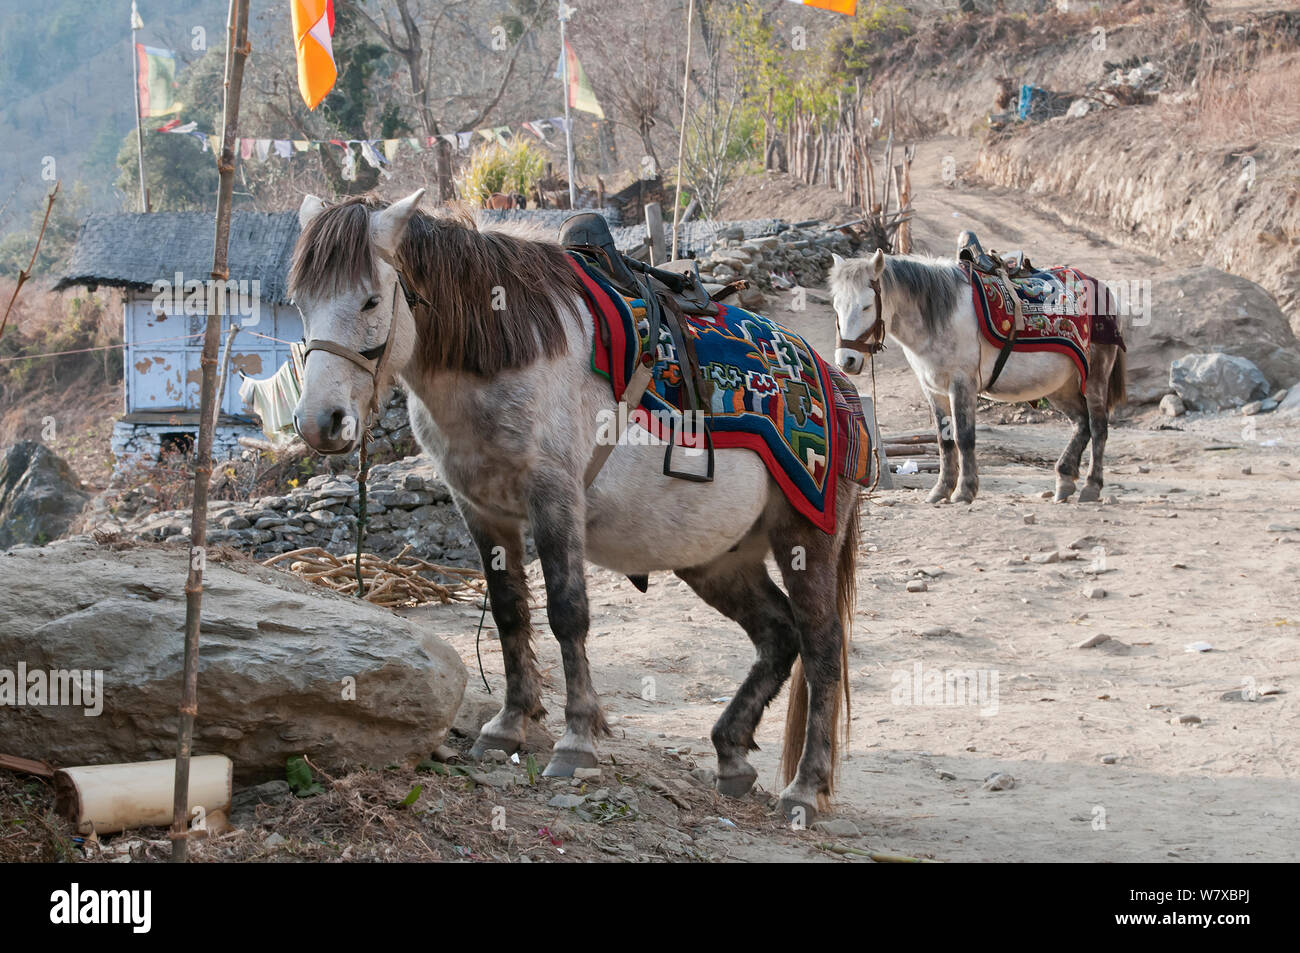 Domestic horses at a local Buddhist festival in the run up to the greater Torgya festival in Tawang, Namchu, Arunachal Pradesh, India. January 2014. Stock Photo